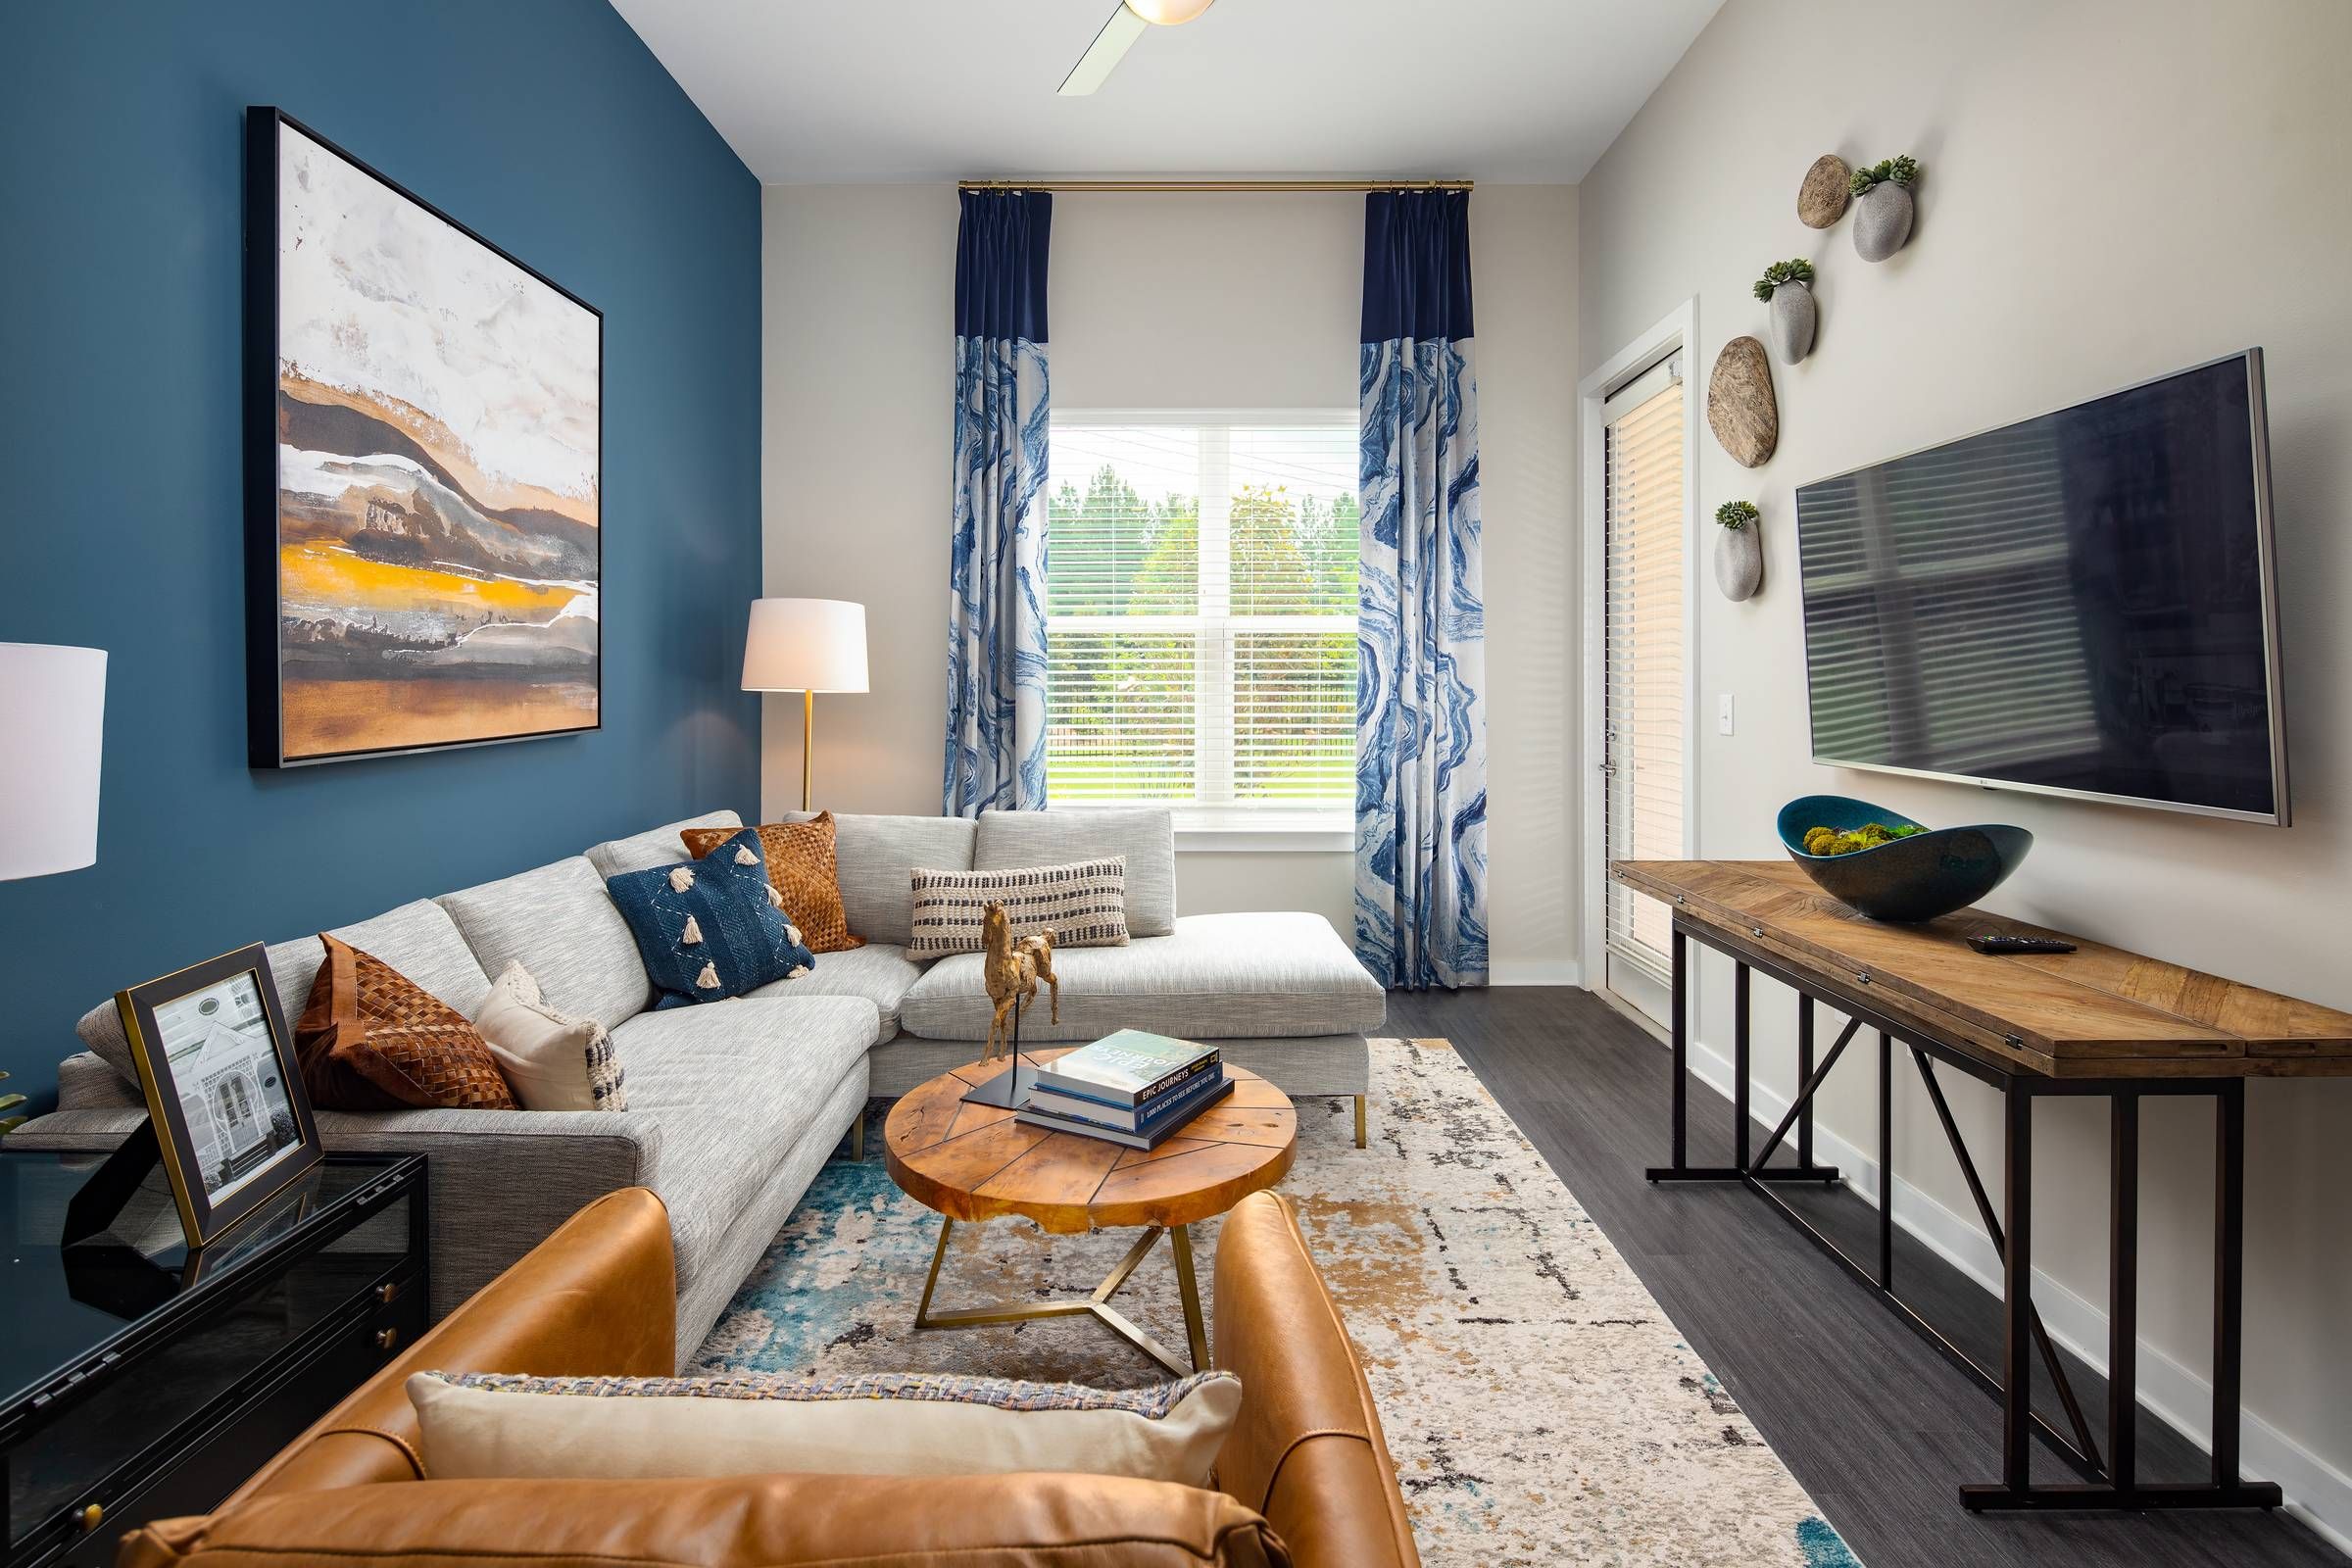 A stylish living room at Alta Sugarloaf with a gray sectional sofa, blue accent wall, eclectic decor, and large windows draped in patterned curtains.